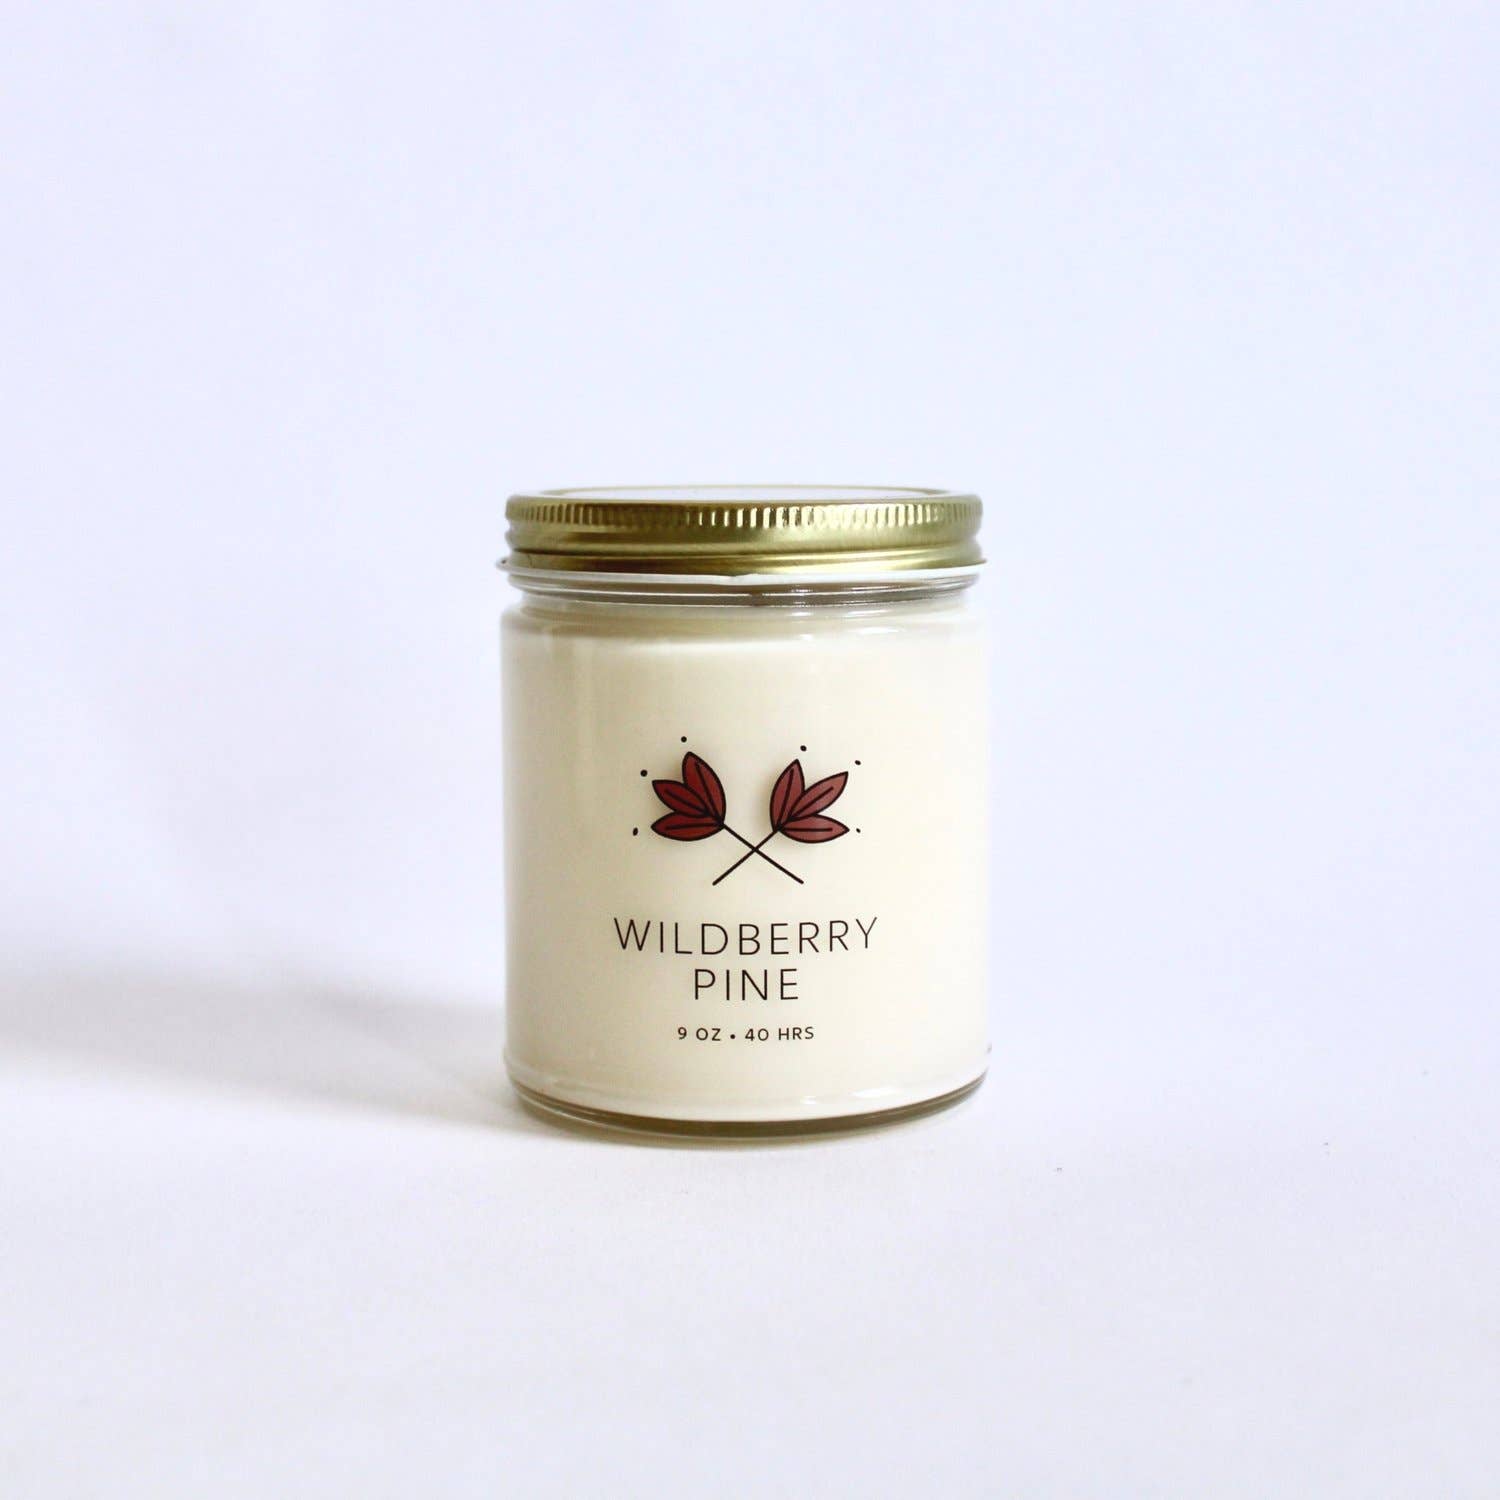 Wildberry Pine Signature Soy Wax Candle Jar